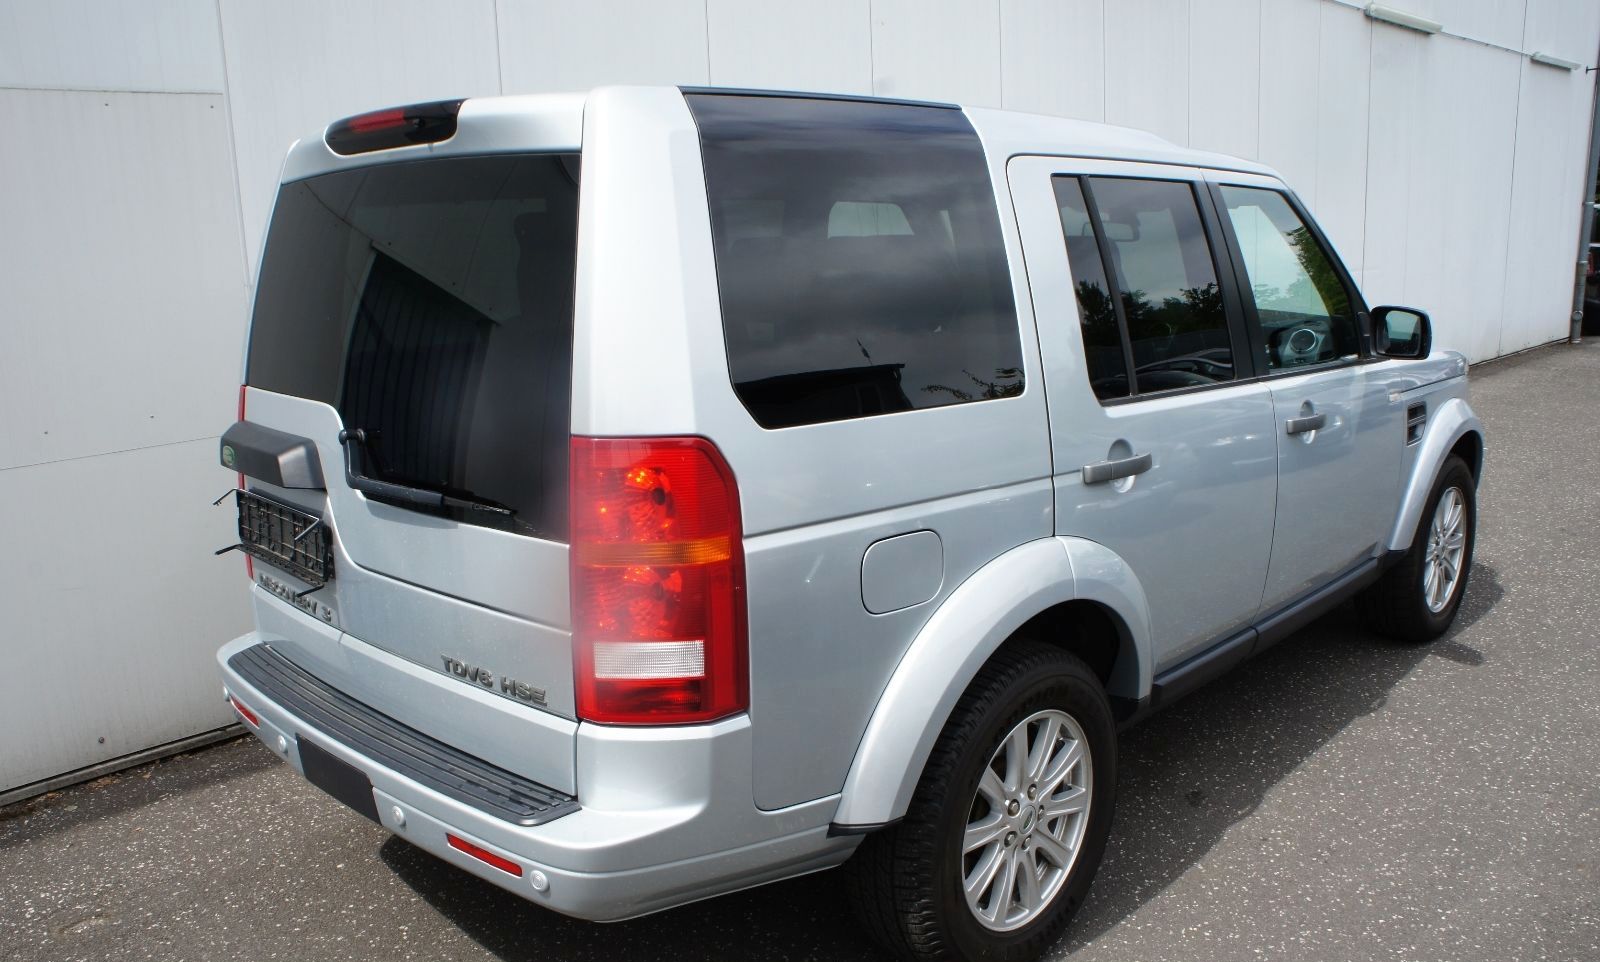 Left hand drive LANDROVER DISCOVERY TDV6 HSE 7 SEATS